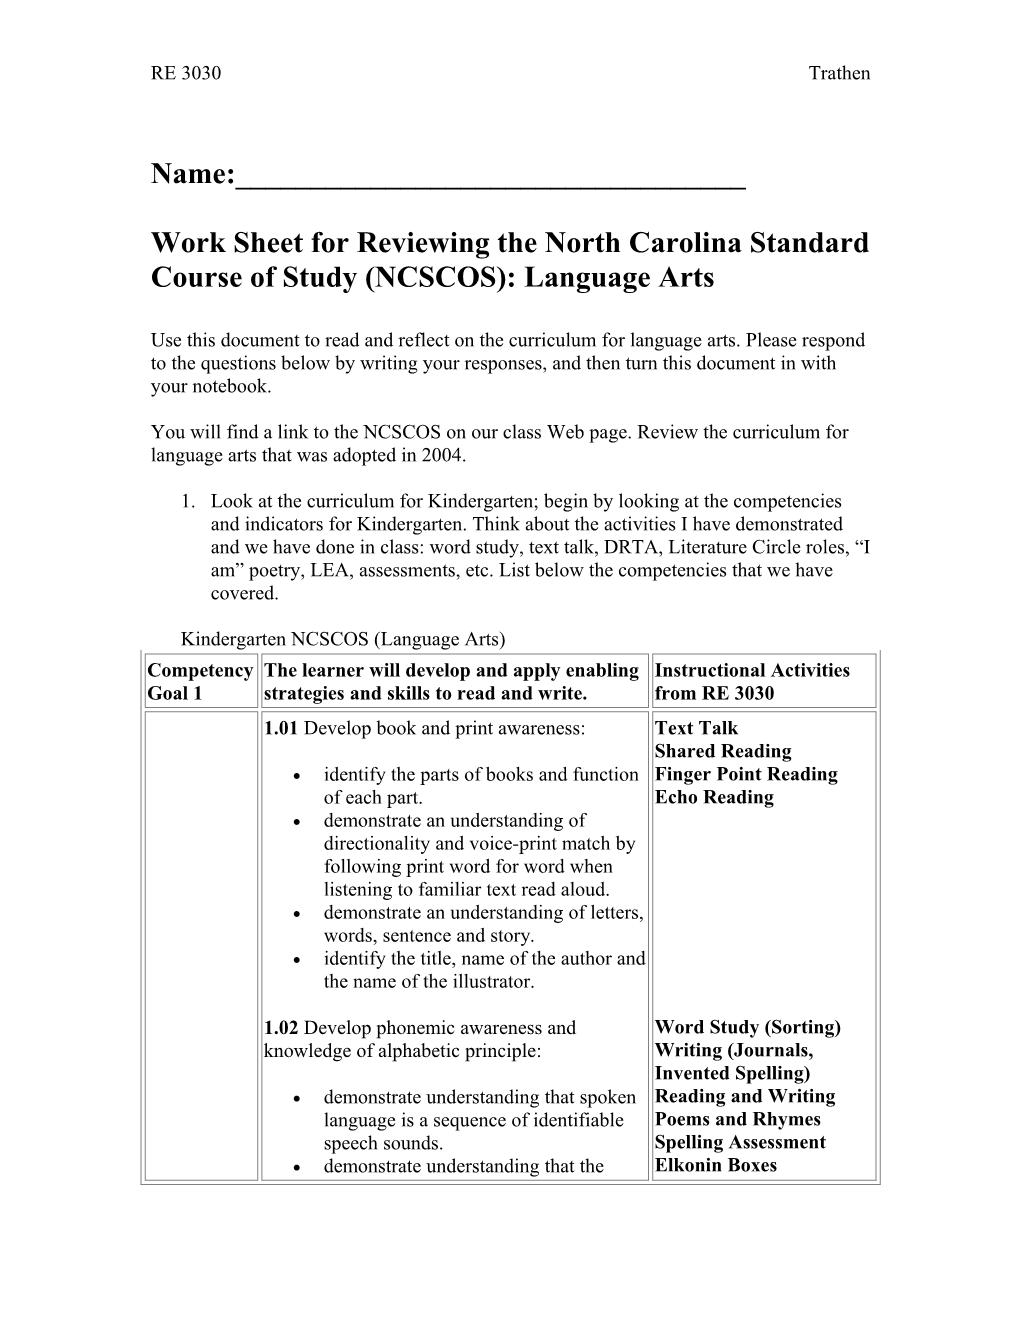 Work Sheet for Reviewing the North Carolina Standard Course of Study (NCSCOS): Language Arts